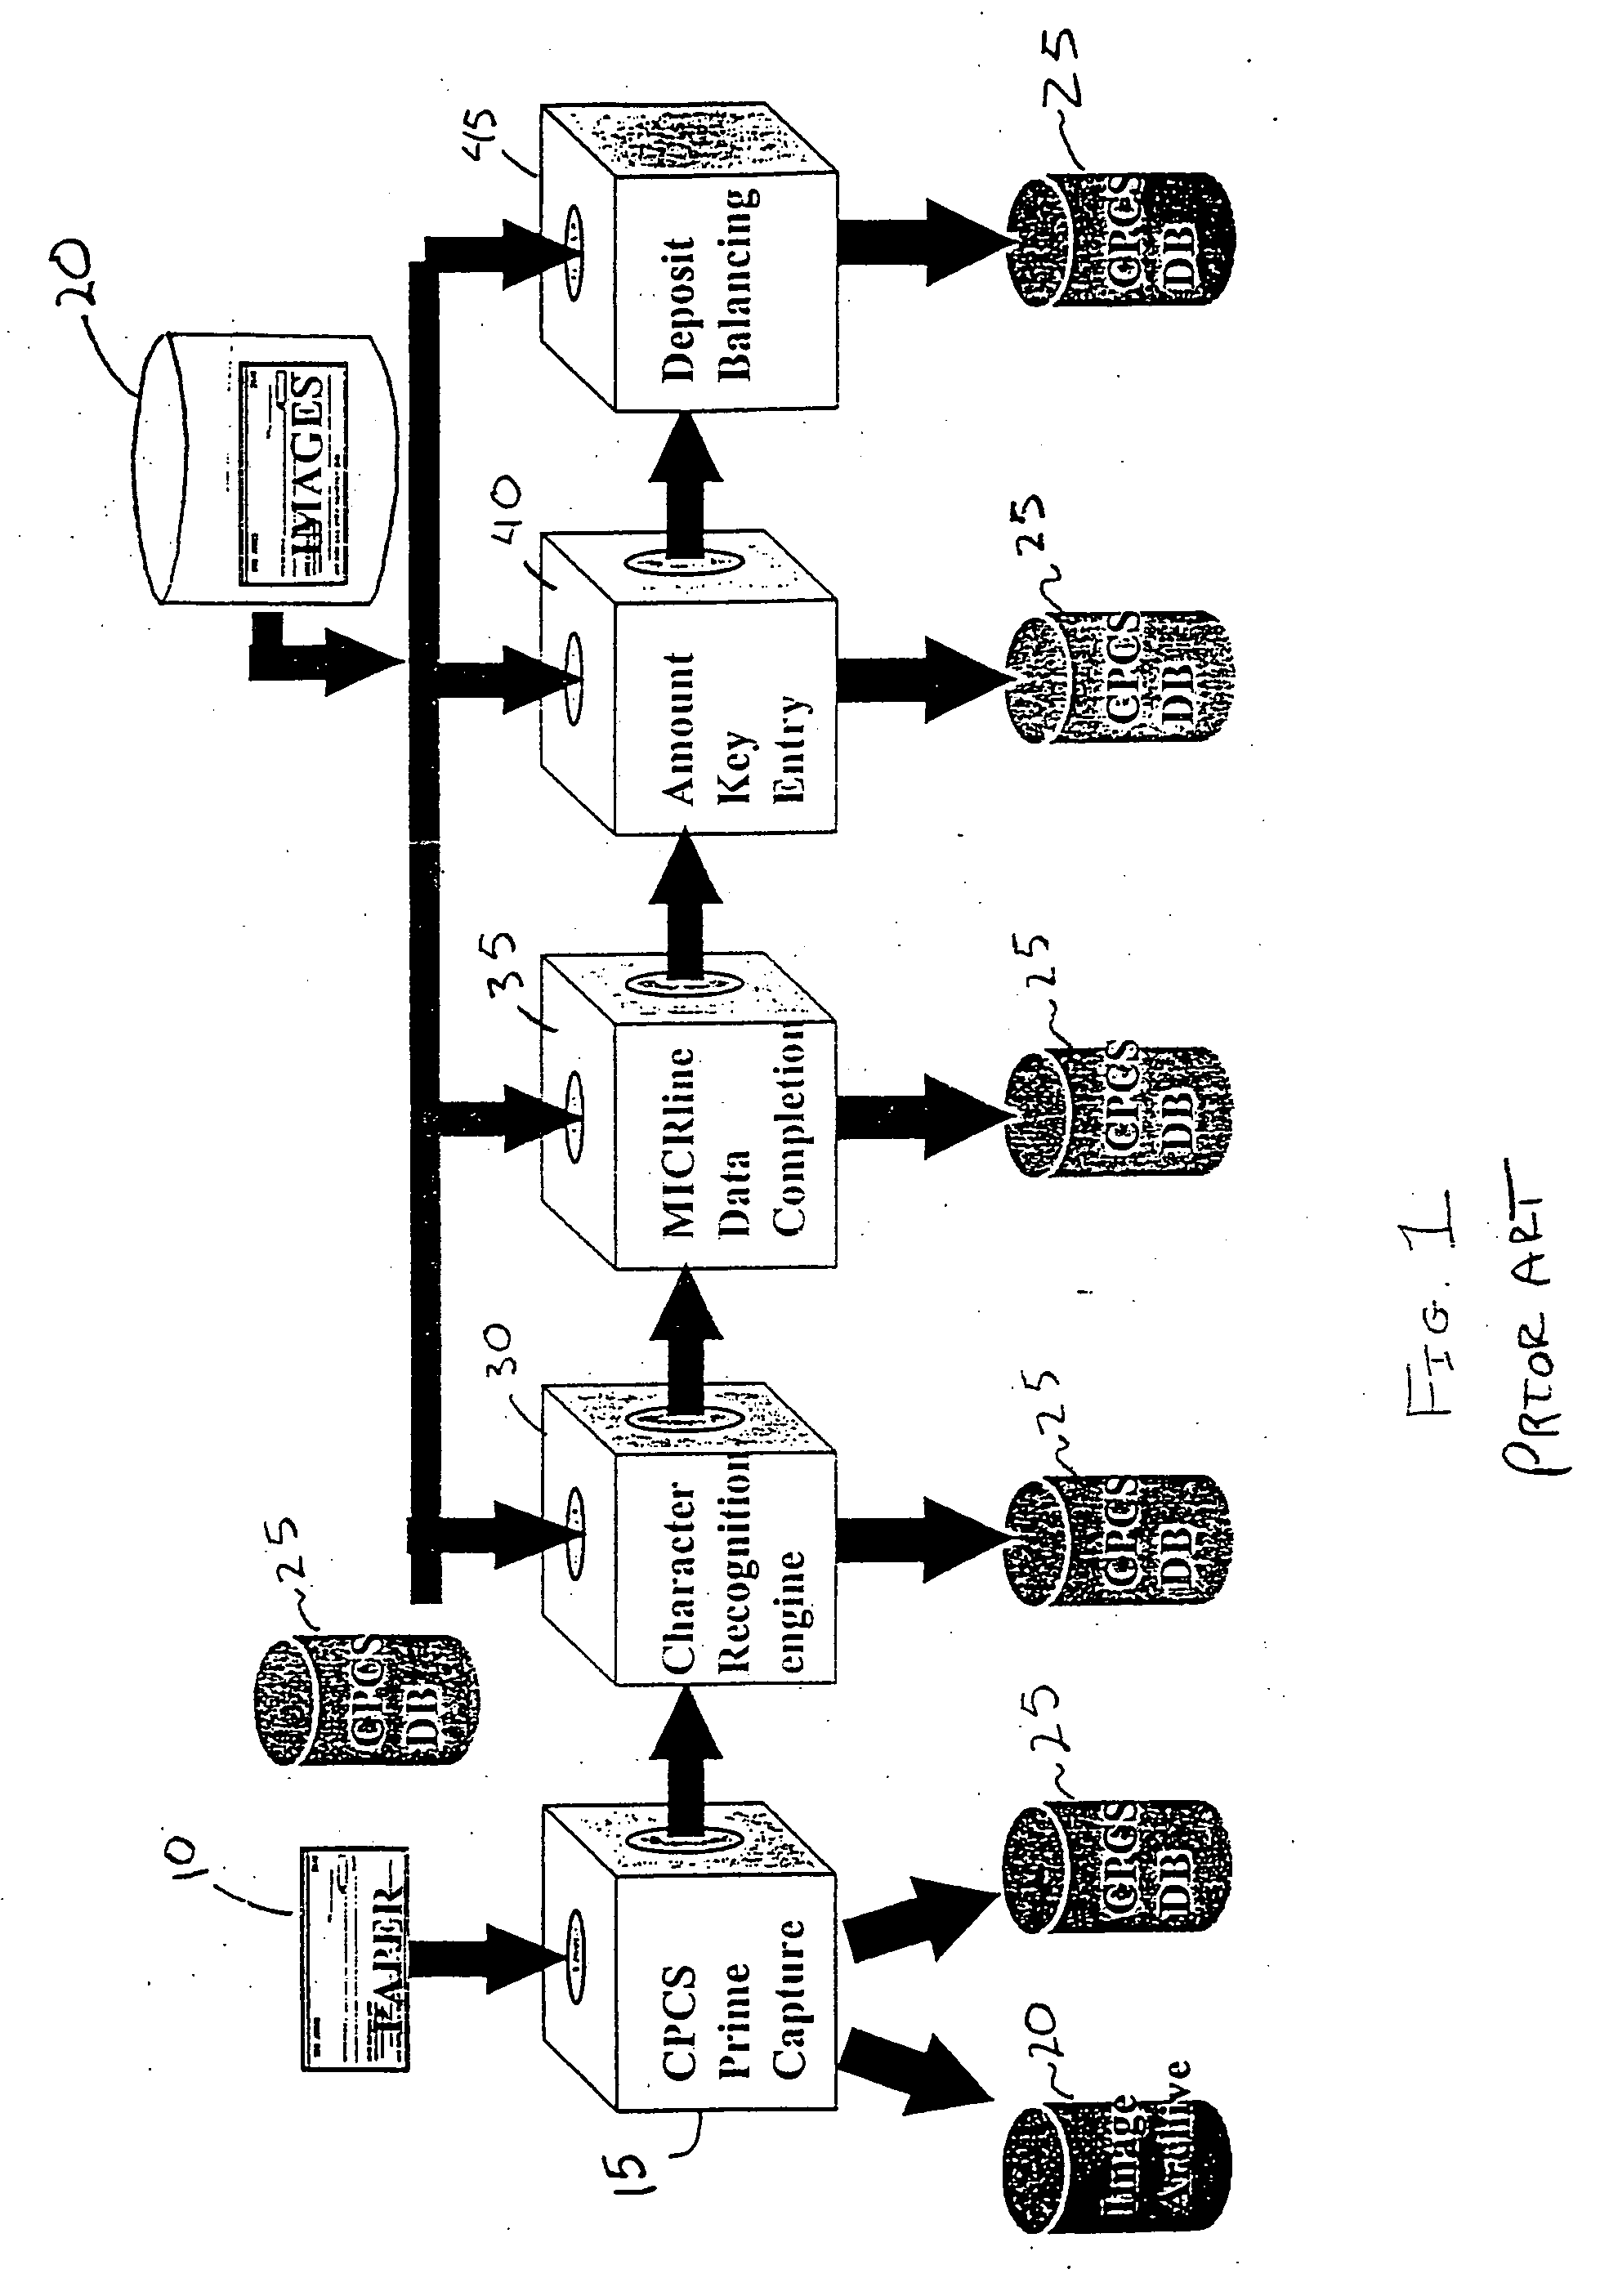 System and method for back office processing of banking transactions using electronic files